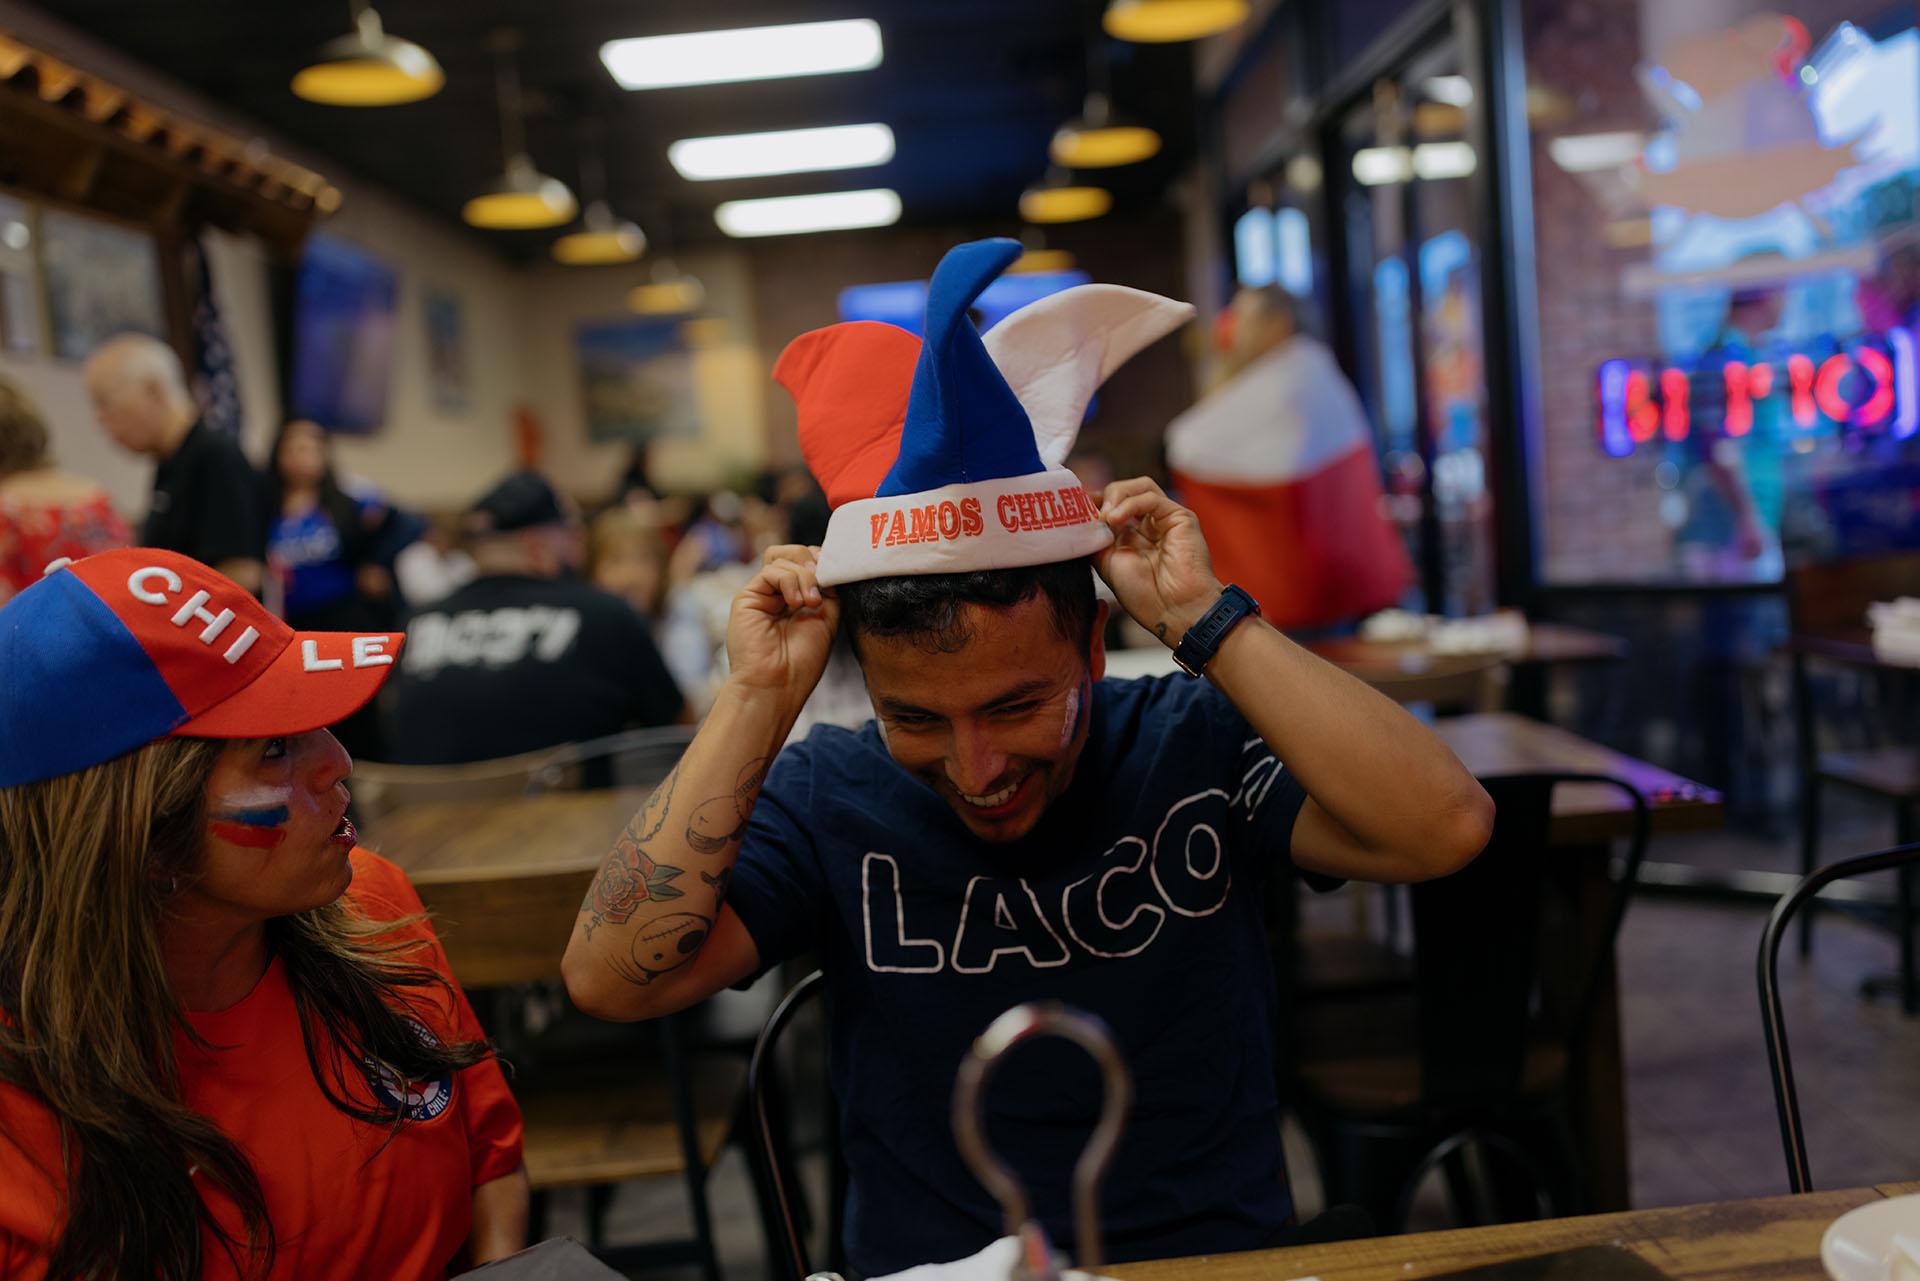 A person wears a Chilean hat while celebrating before the game starts.